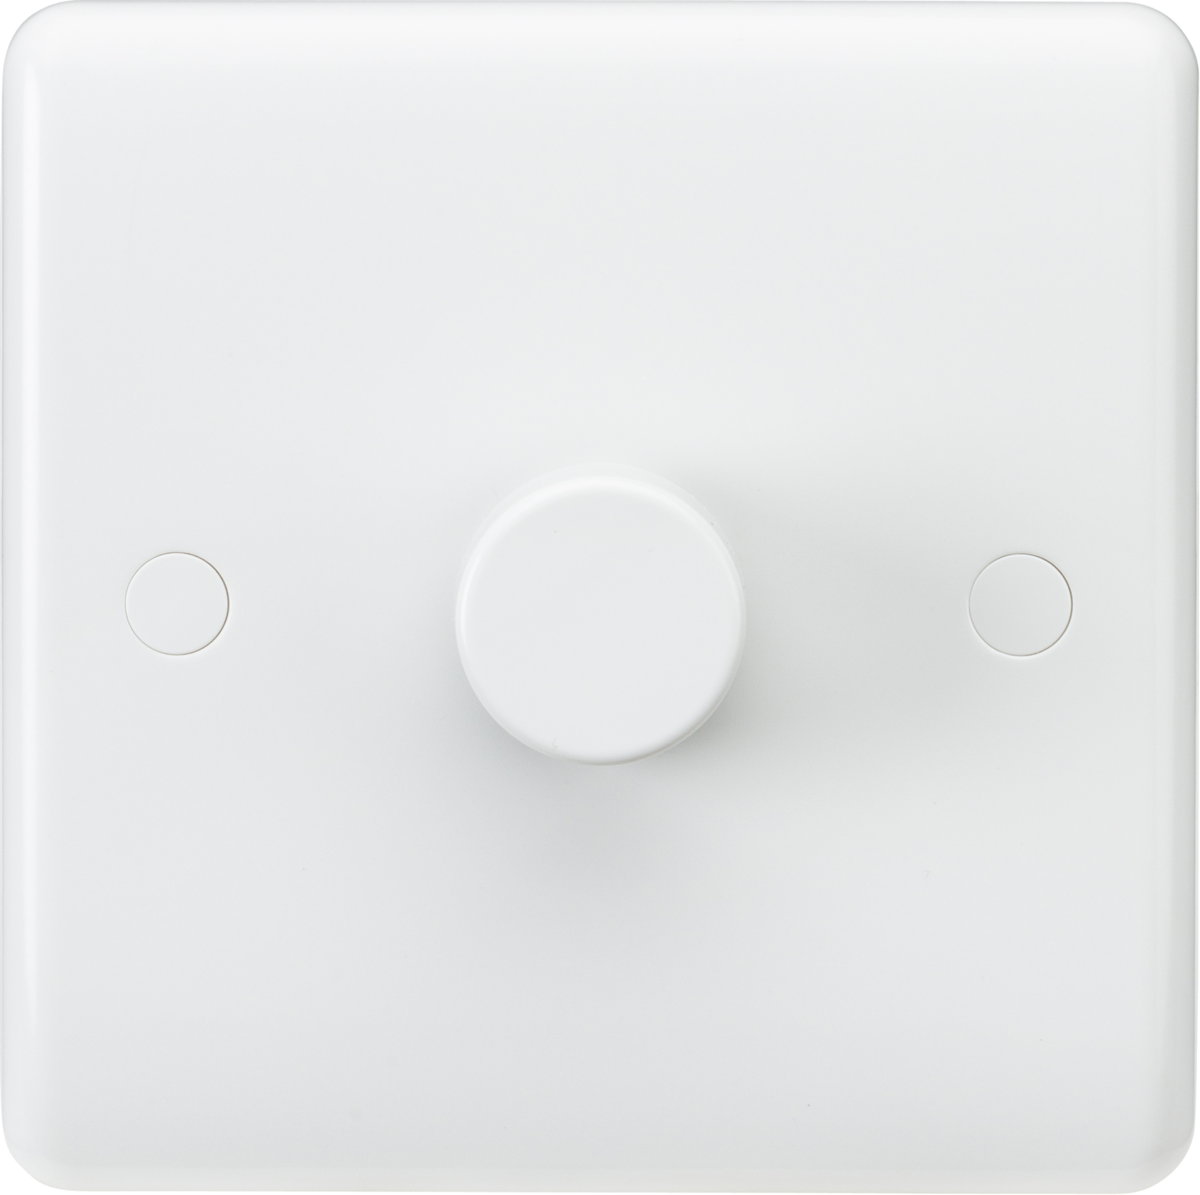 Knightsbridge Curved Edge 3-100W LED Dimmer Switch Push On Off